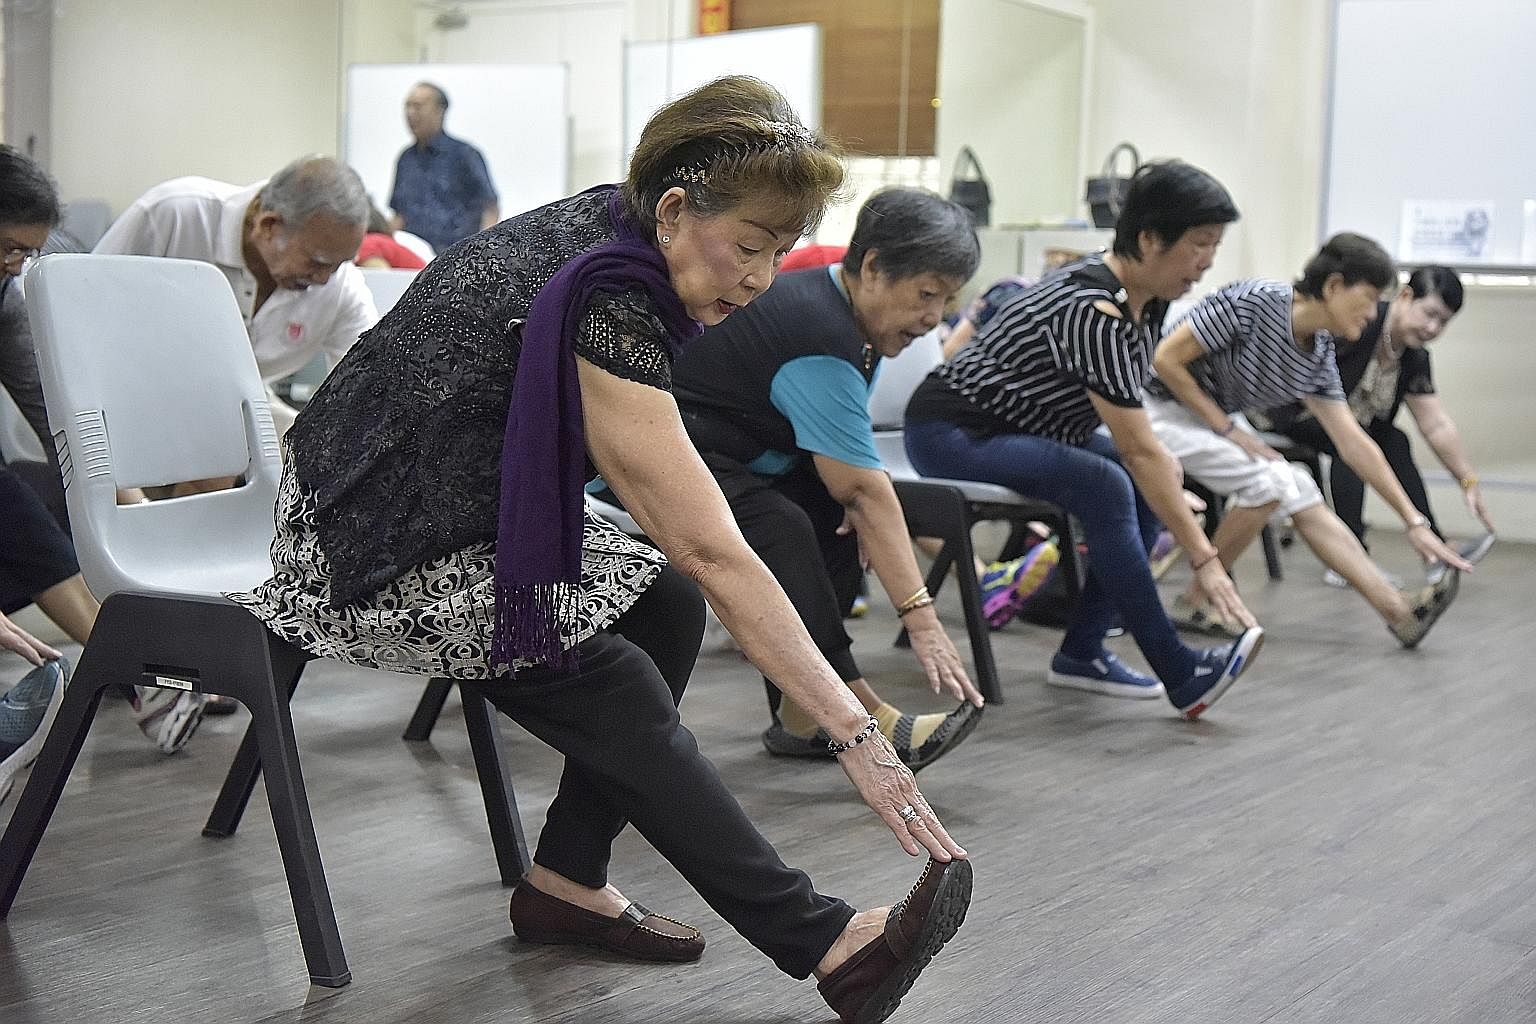 Retiree Kok Ho Moi (far left), 72, who is classified as "pre-frail", keeps herself nimble by taking part in group exercises at the Choa Chu Kang Fei Yue Retirees Centre.